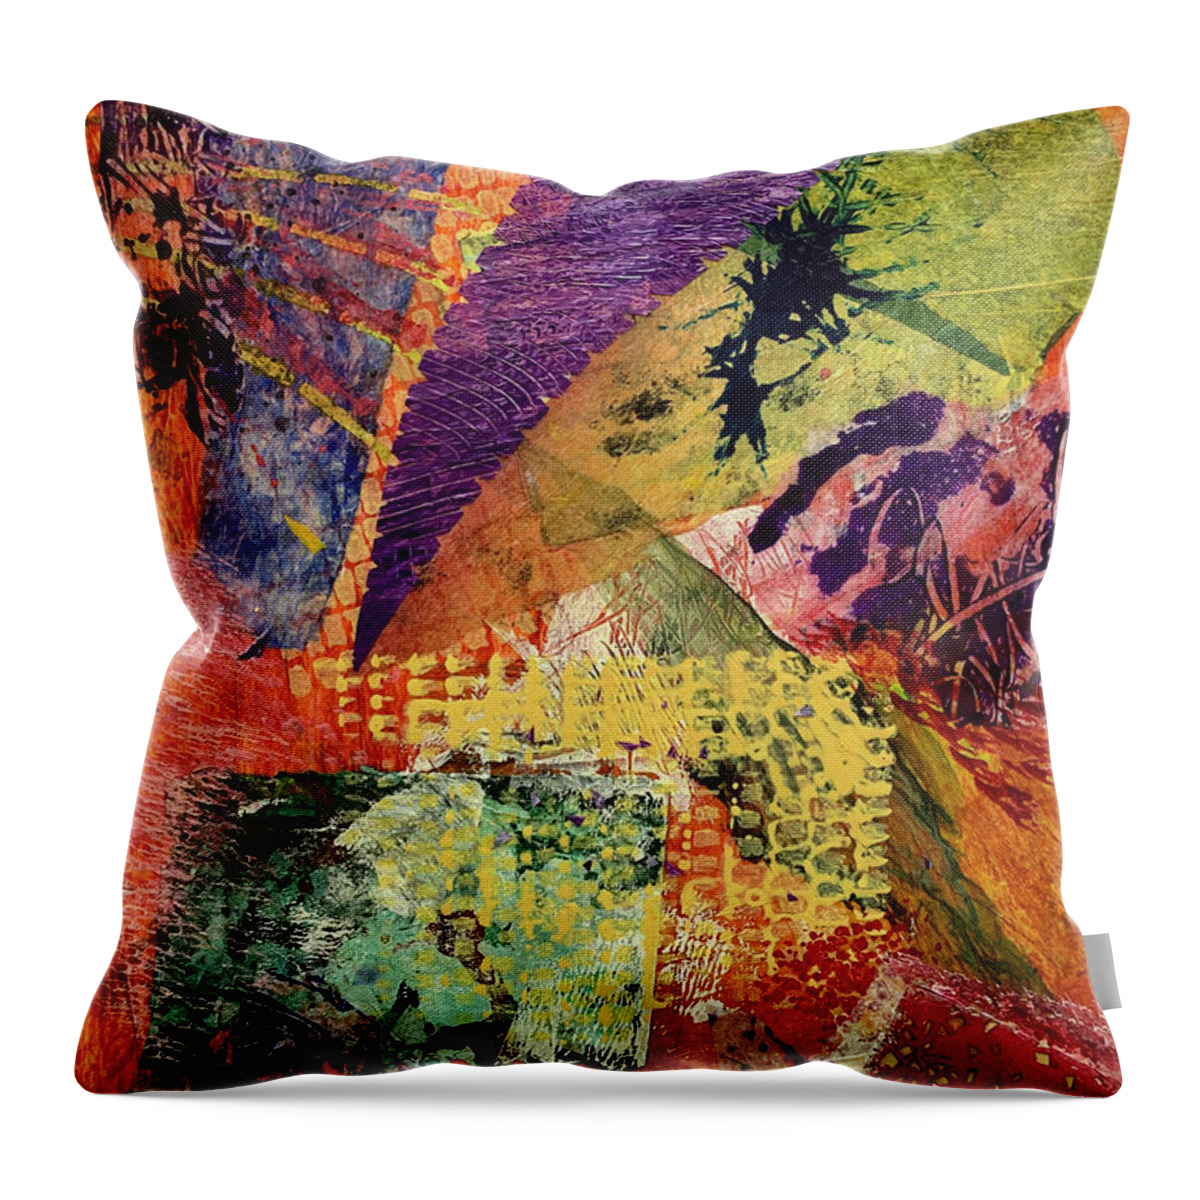 Collage Throw Pillow featuring the mixed media Abstract Collage #1 by Lorena Cassady